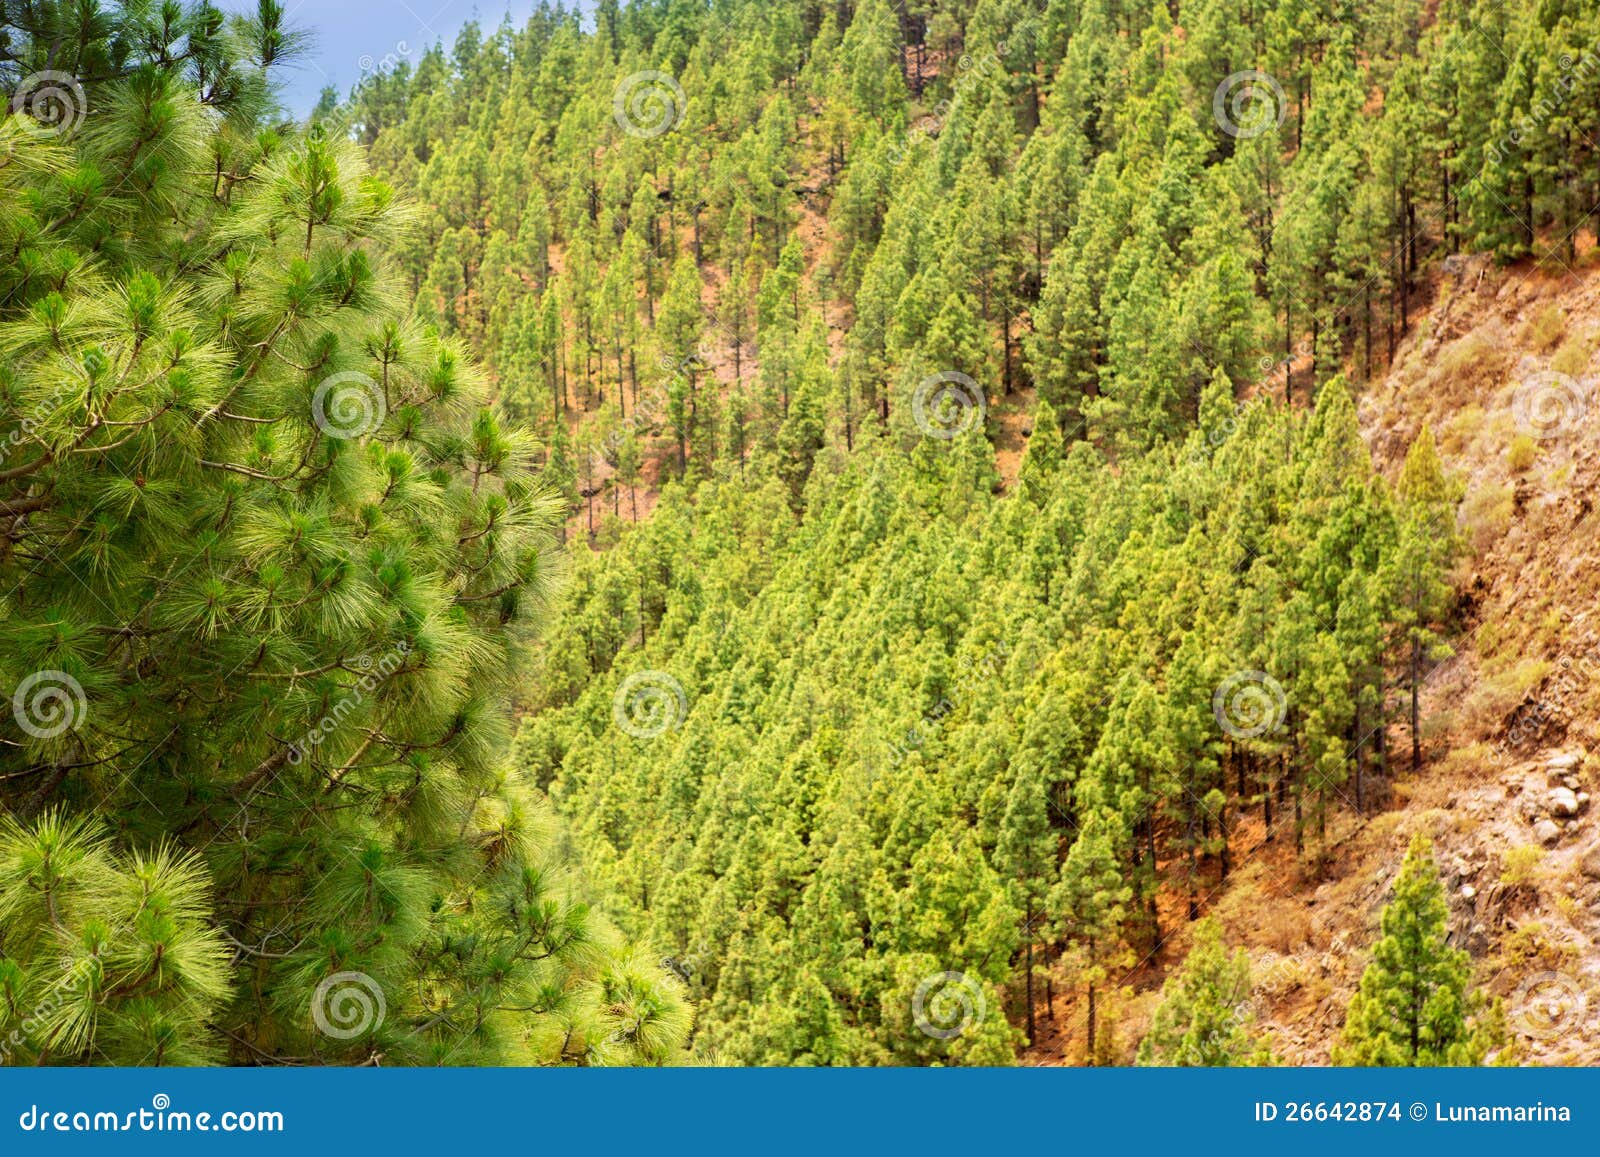 corona forestal in teide national park at tenerife